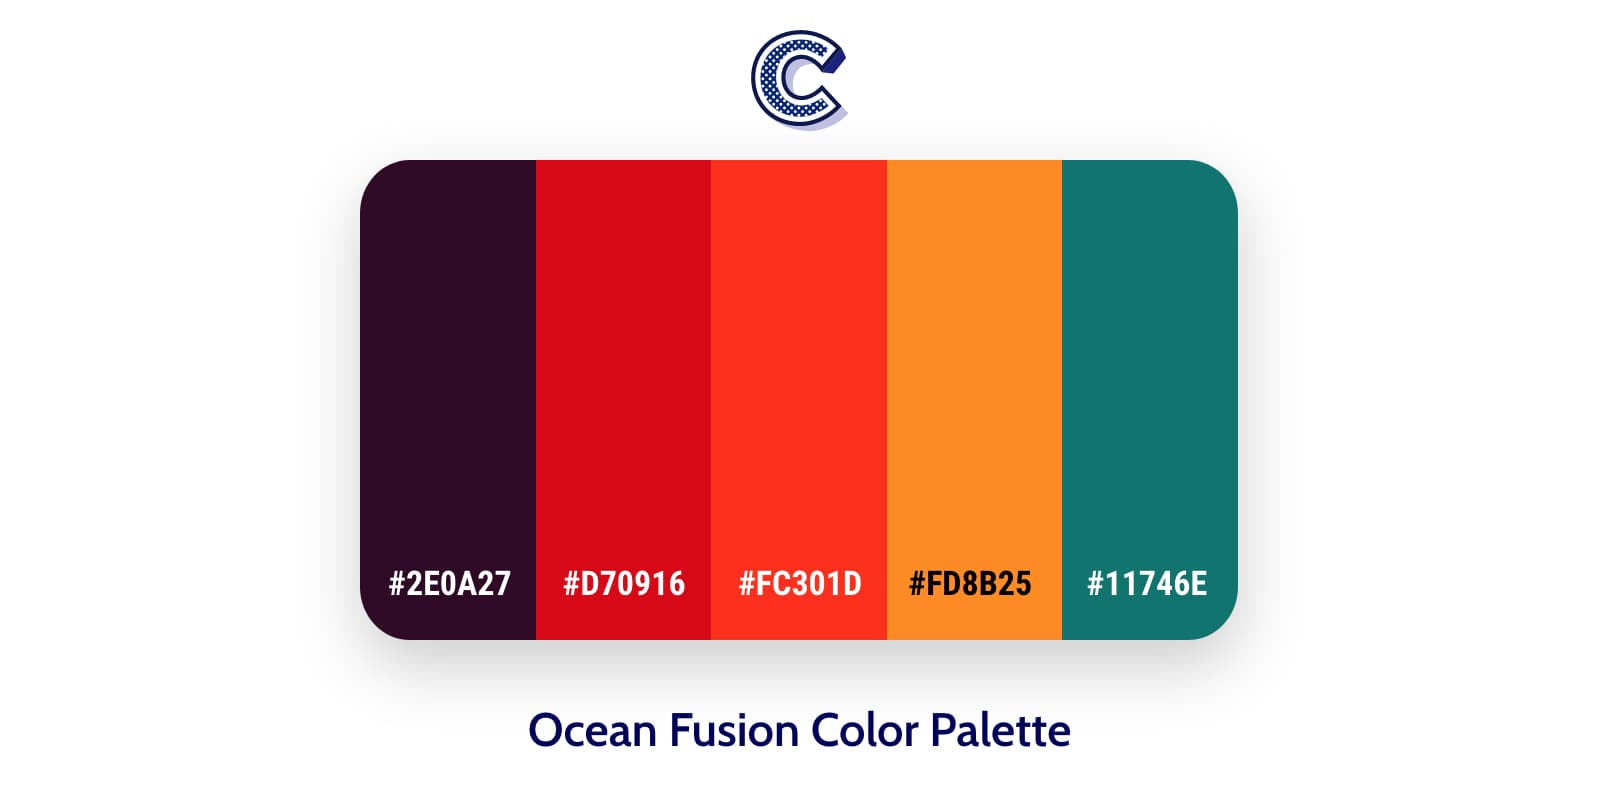 the featured image of ocean fusion color palette